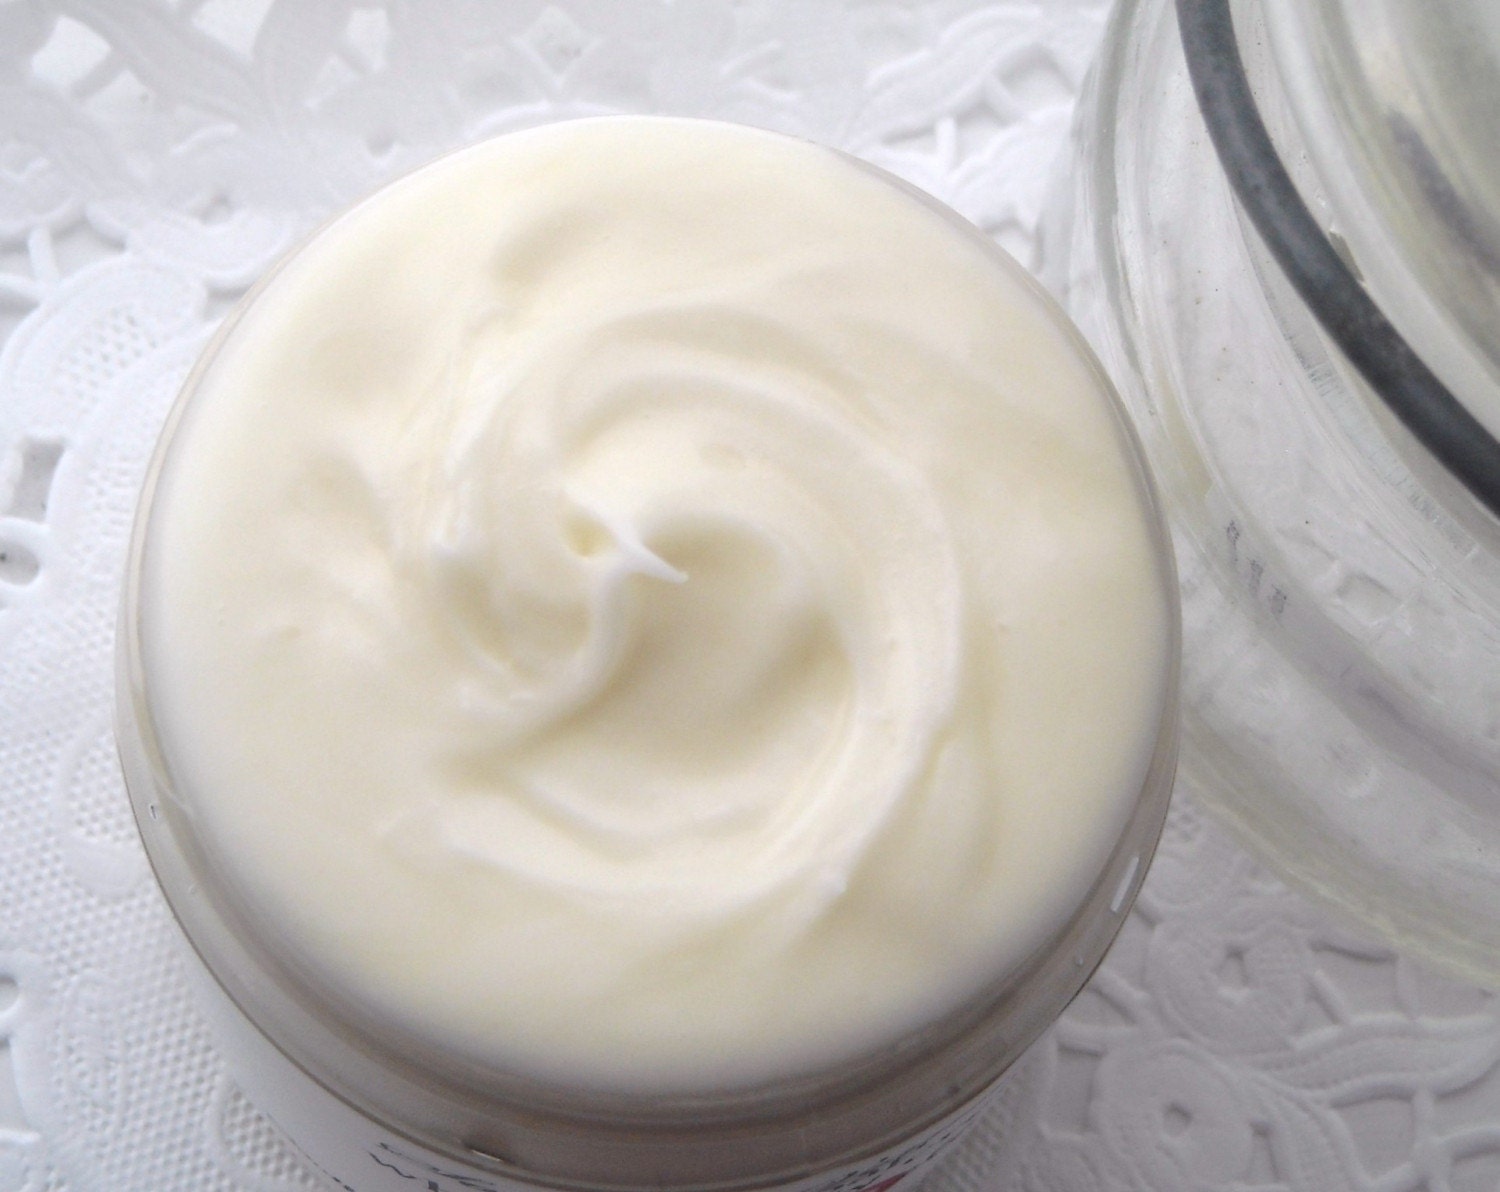 Whipped Body Cream With Shea and Cocoa Butter - 8 Ounce Jar In Your Choice Of Scent - Over 200 To Choose From